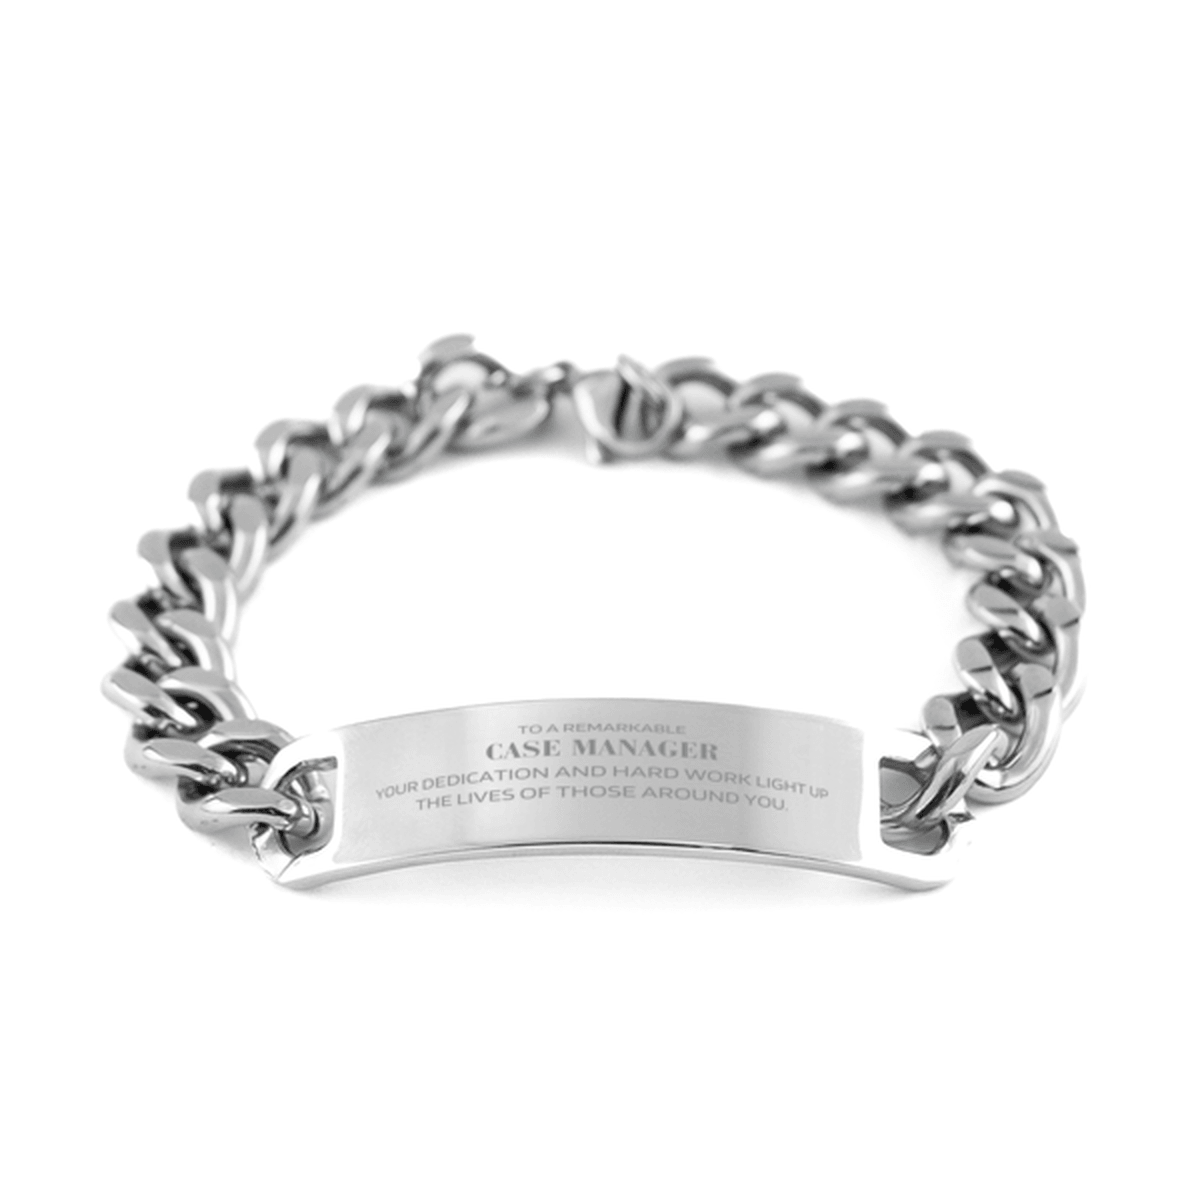 Remarkable Case Manager Gifts, Your dedication and hard work, Inspirational Birthday Christmas Unique Cuban Chain Stainless Steel Bracelet For Case Manager, Coworkers, Men, Women, Friends - Mallard Moon Gift Shop